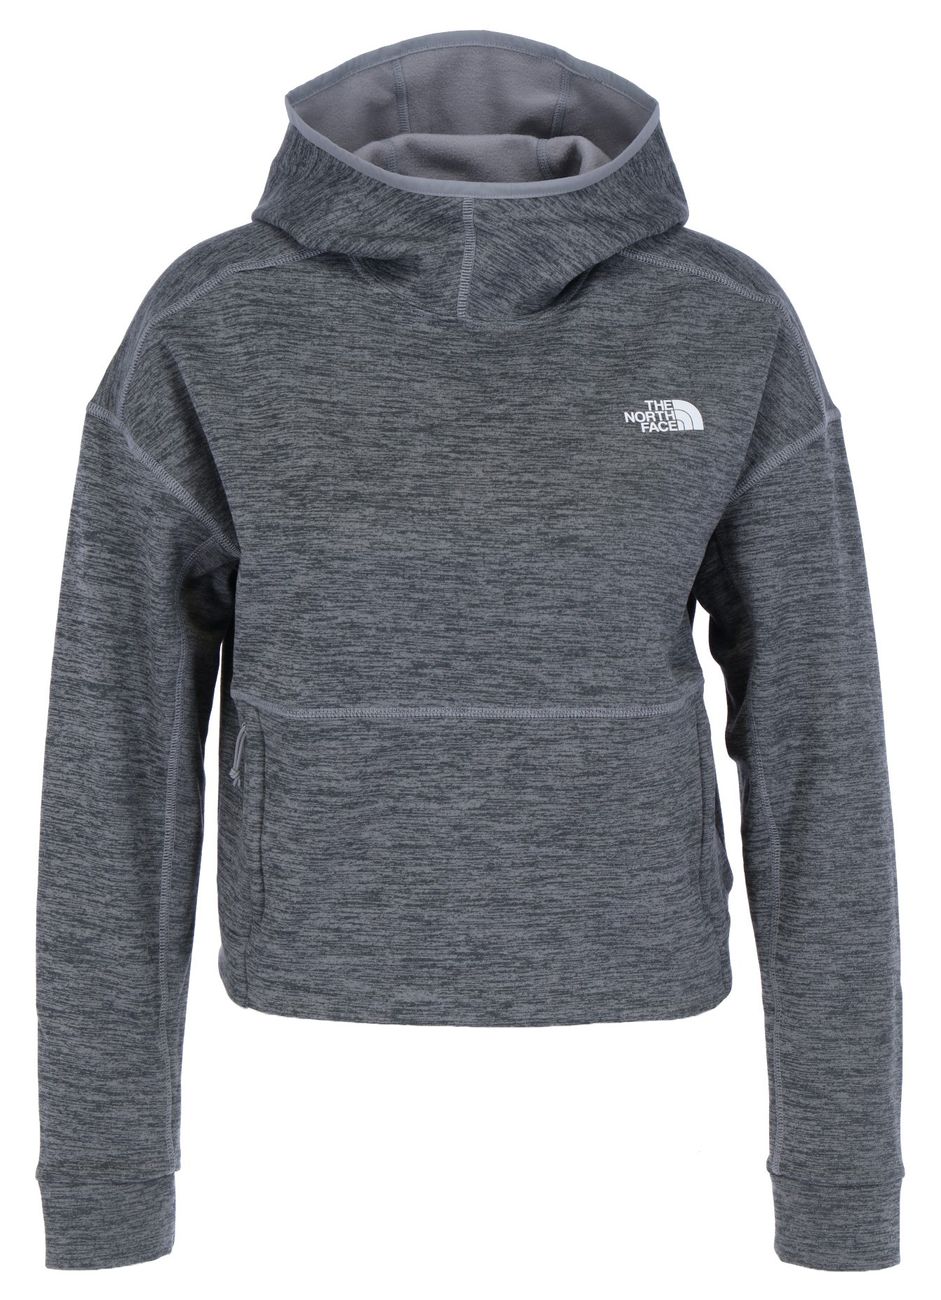 THE NORTH FACE CANYONLANDS PO CROP Damen Hoodie - The North Face - SAGATOO - 195438195593